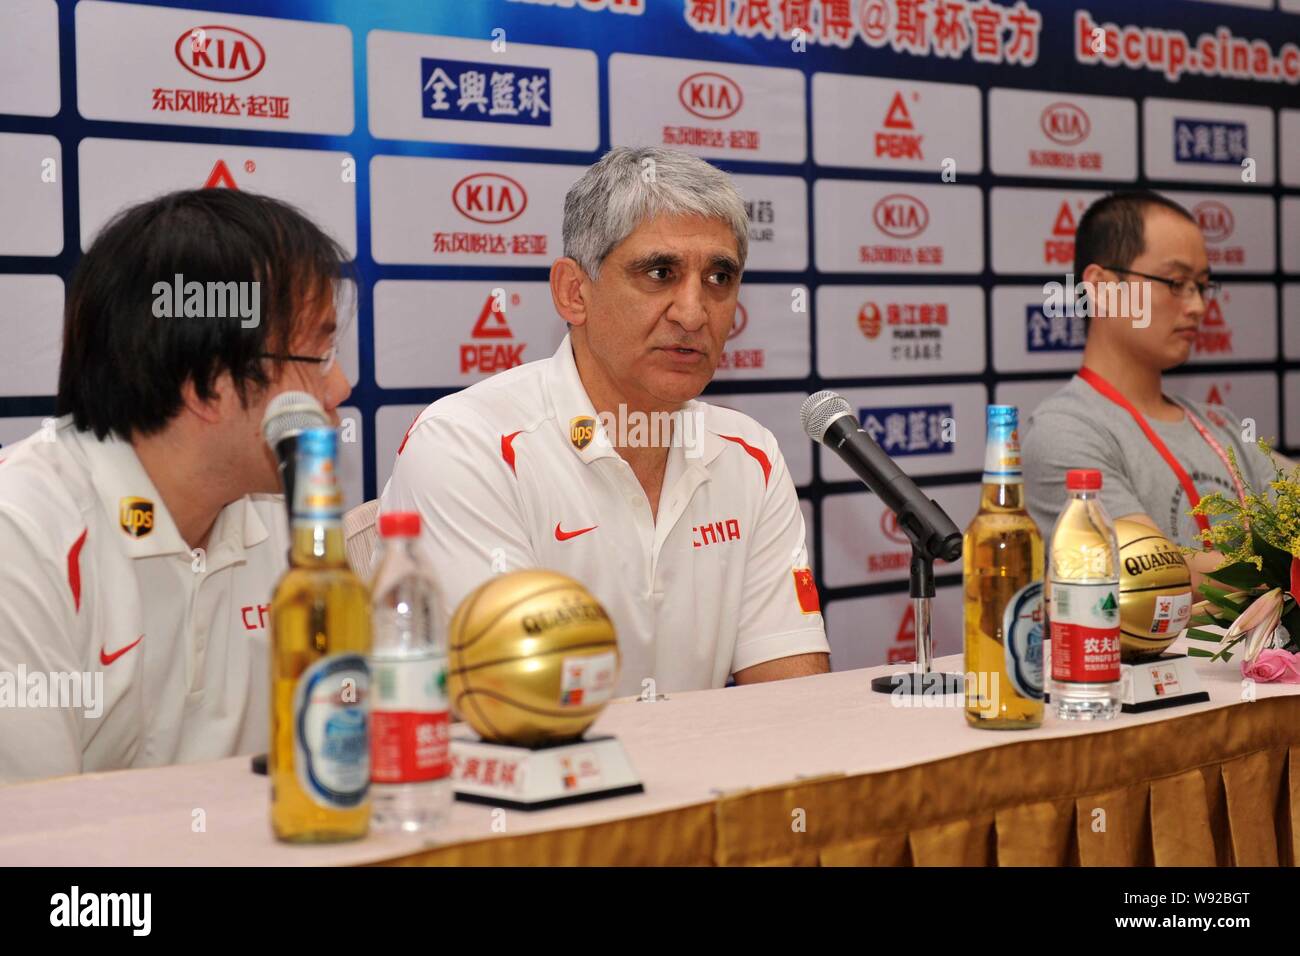 Panagiotis Giannakis, center, the new head coach of the China mens basketball team, attends a press conference for the Stankovic Continental Cup 2013 Stock Photo